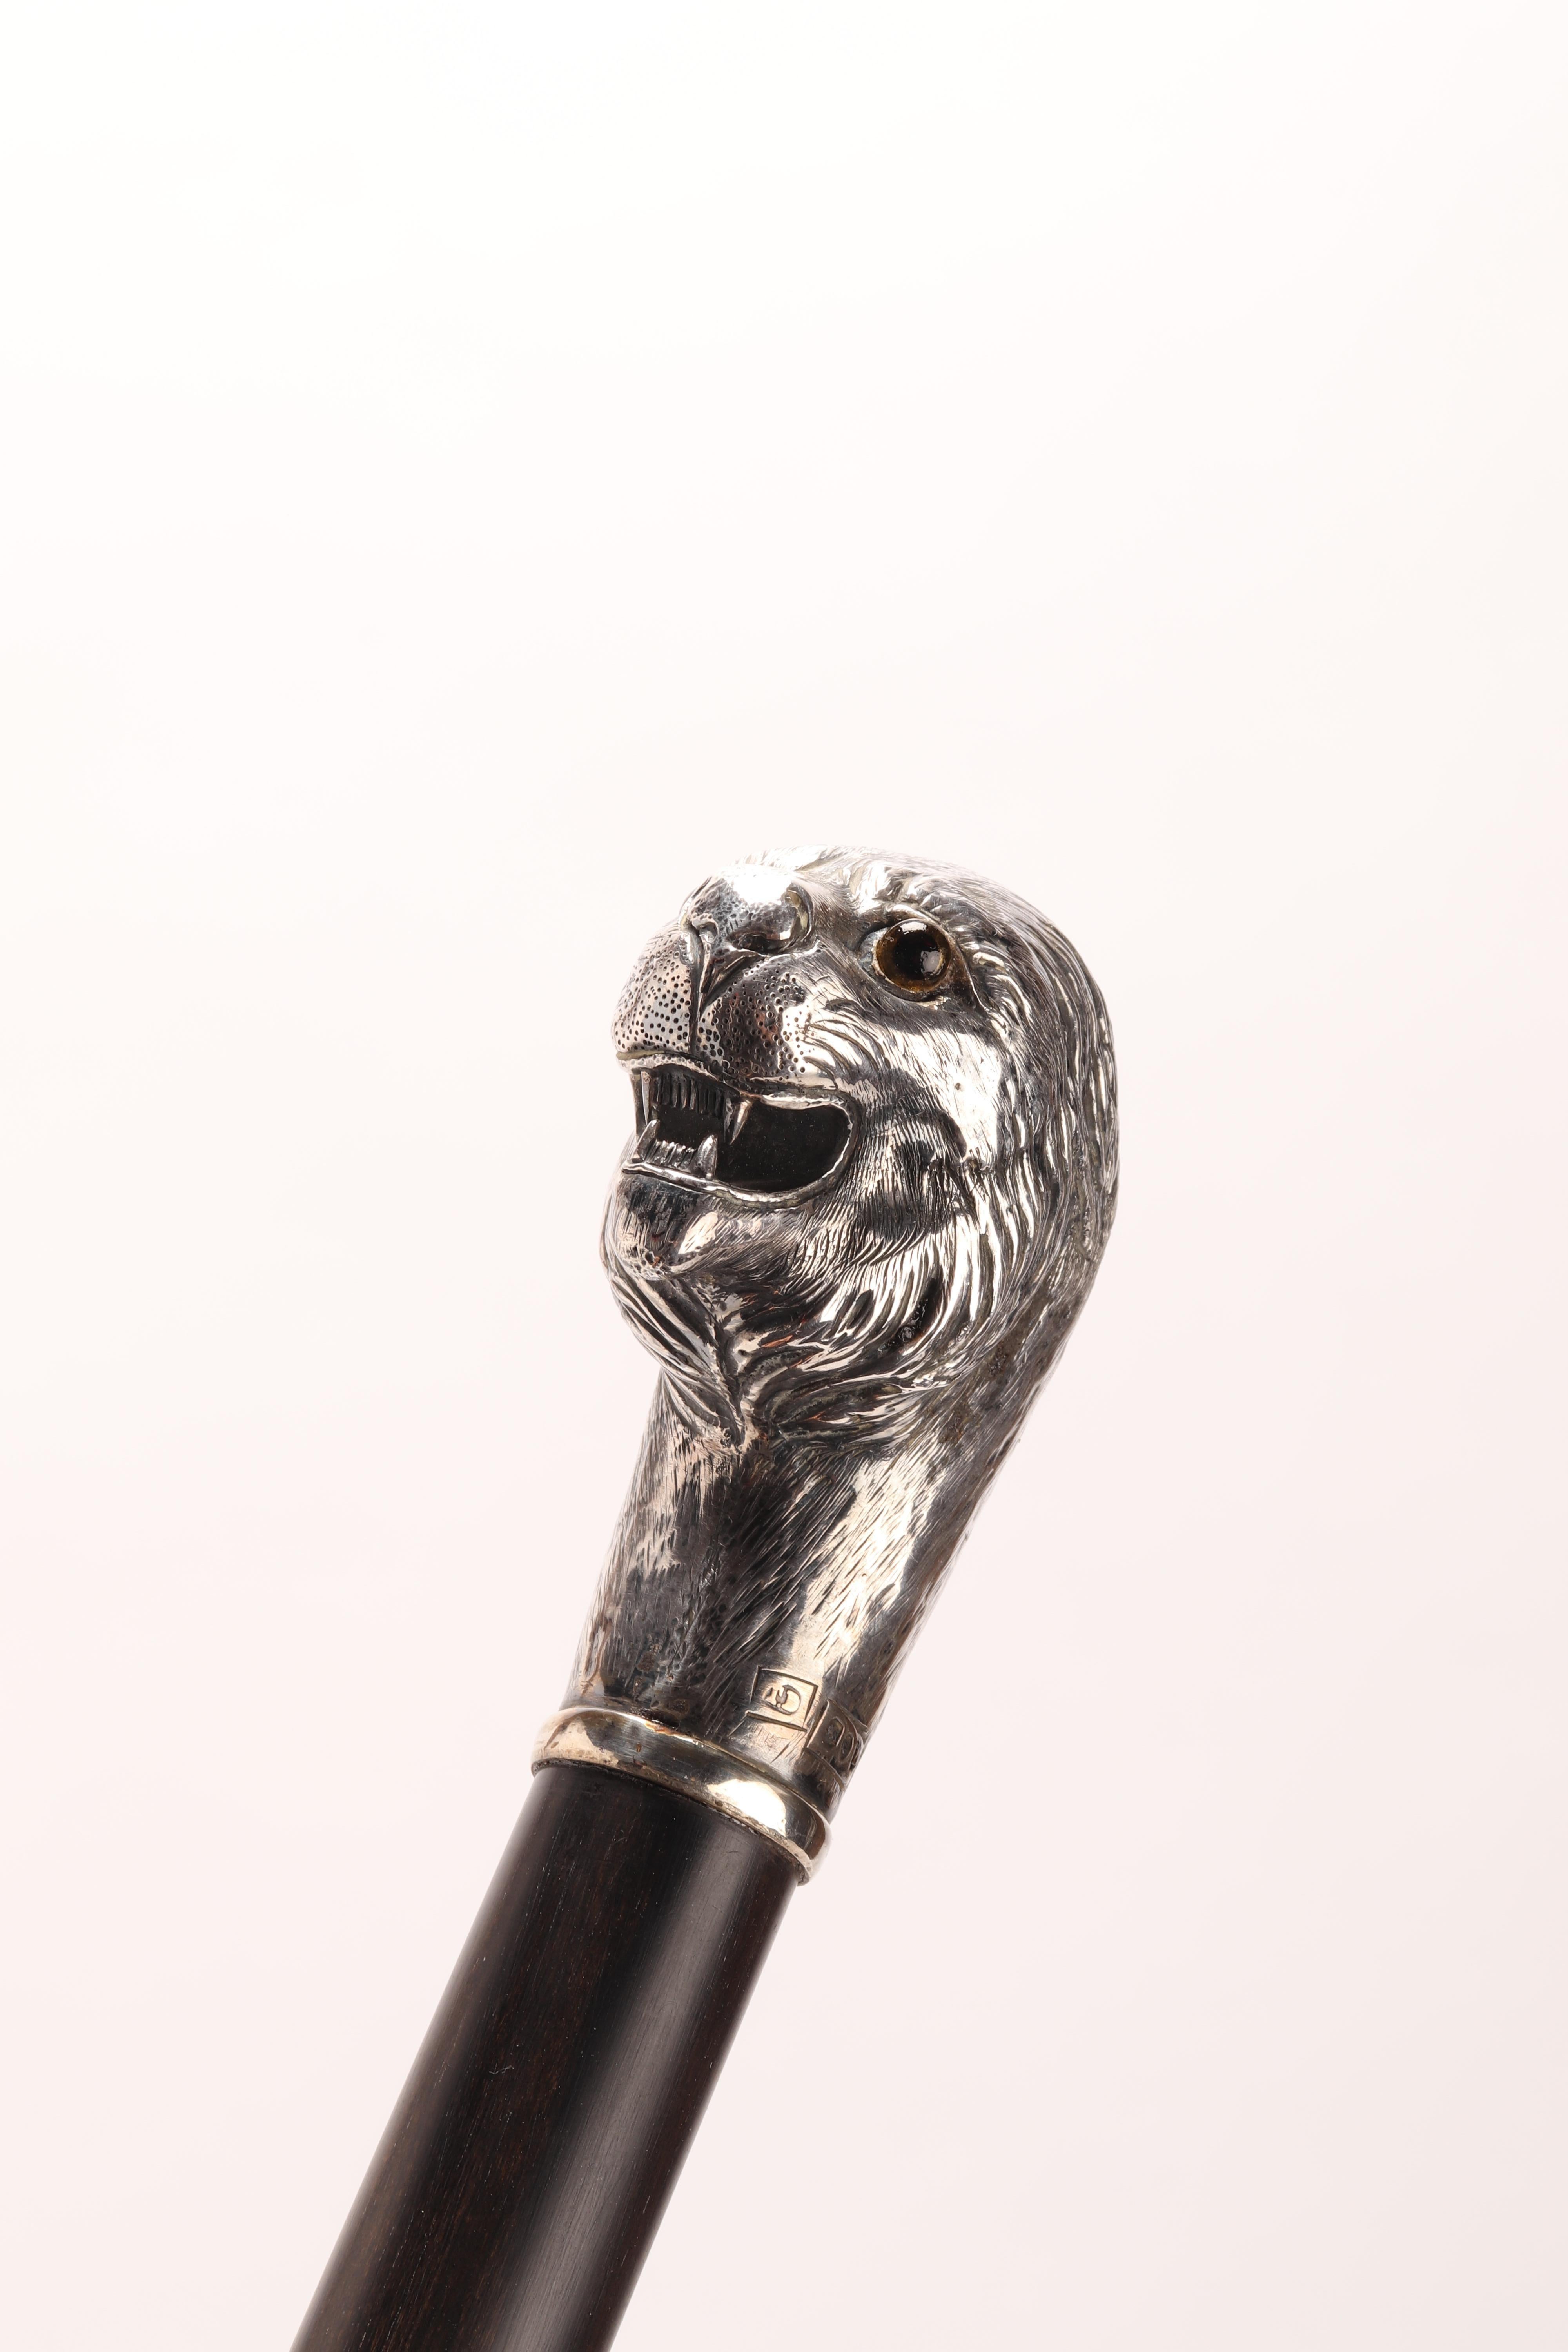 British Silver Walking Stick with a Lion, London, 1900